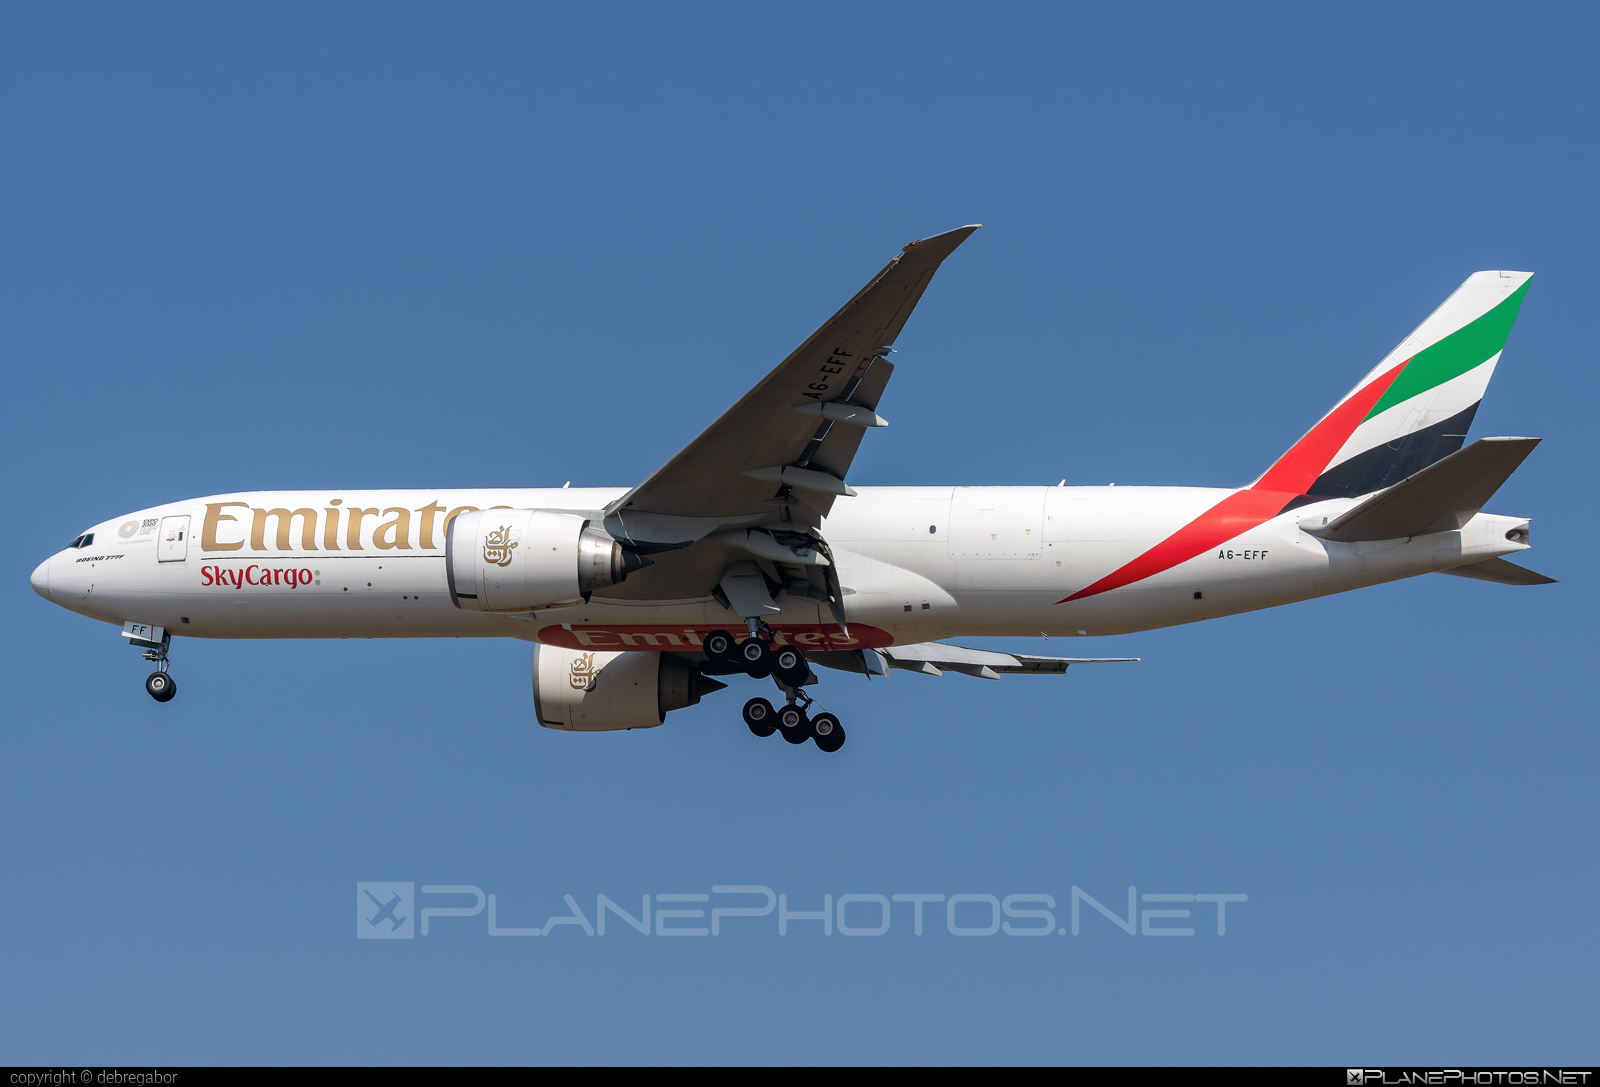 Boeing 777F - A6-EFF operated by Emirates SkyCargo #b777 #b777f #b777freighter #boeing #boeing777 #tripleseven